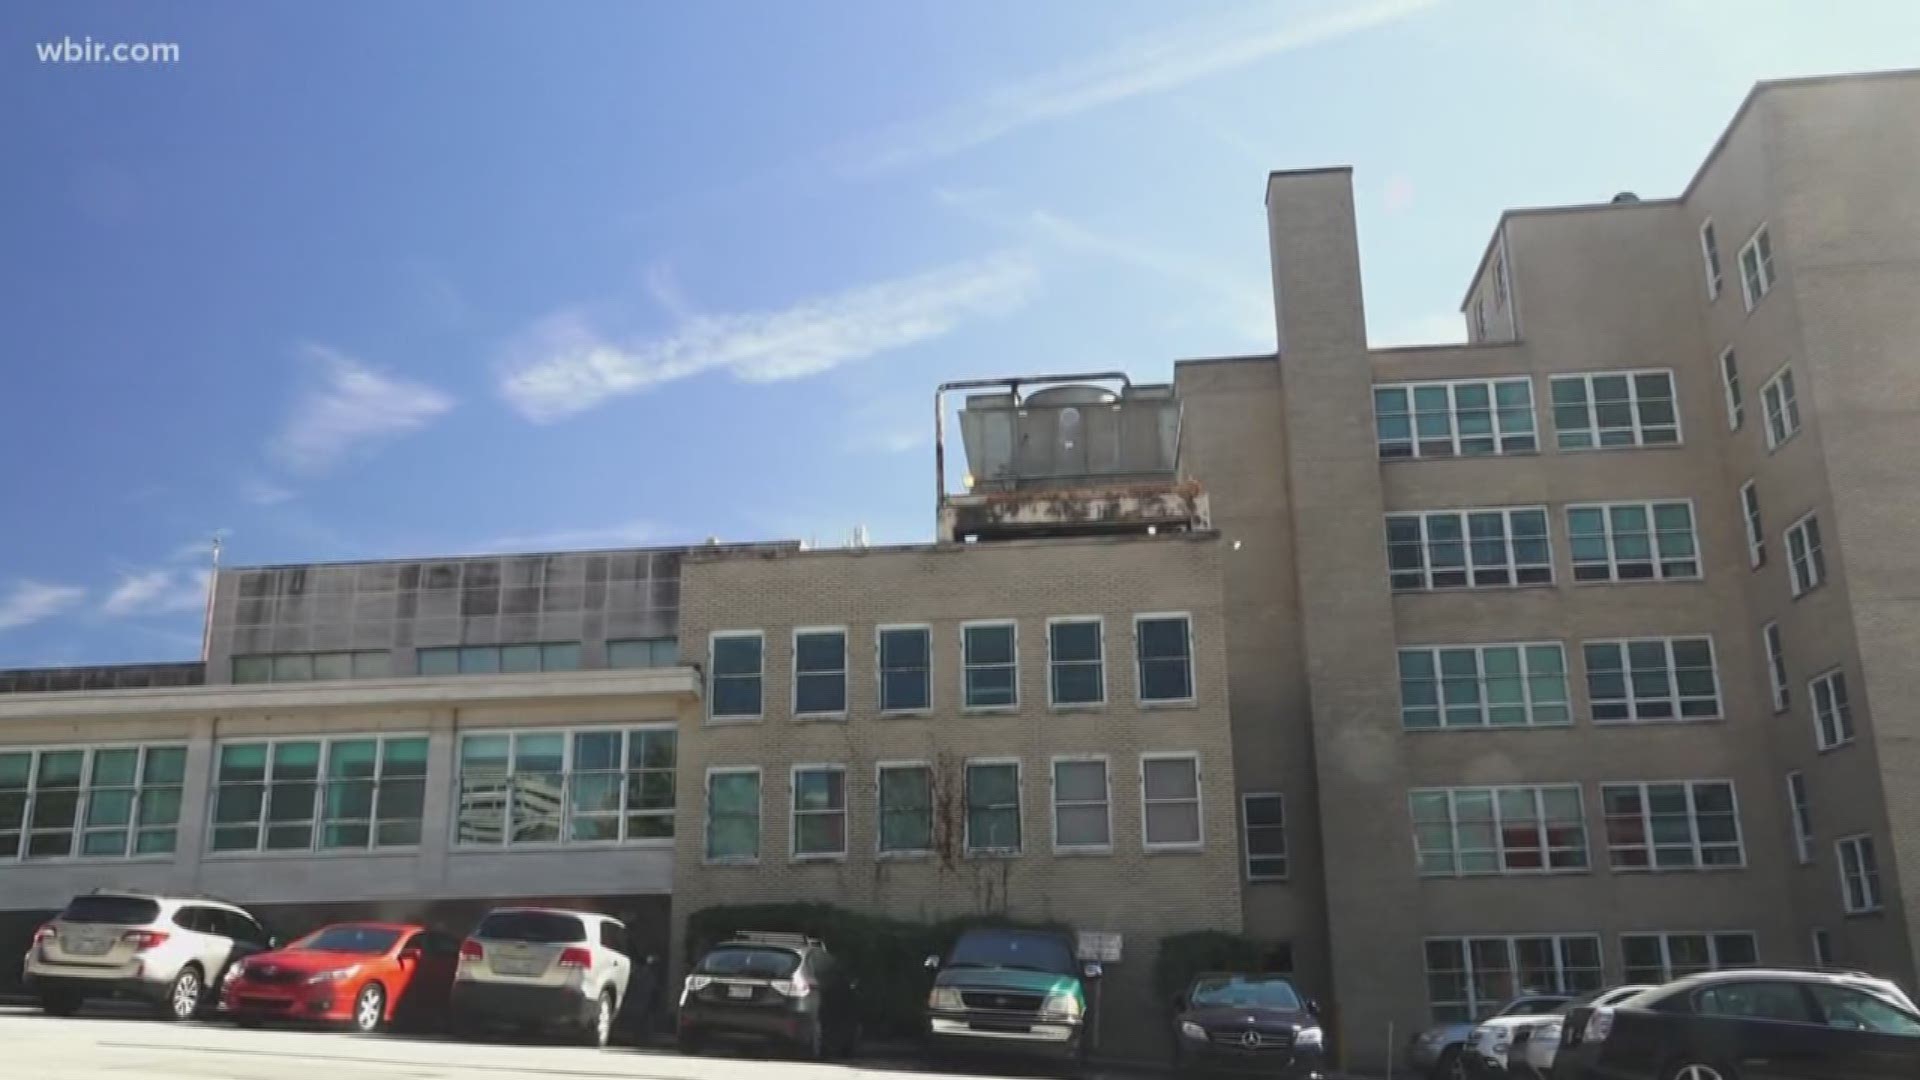 For years, the former site of the state supreme court in downtown Knoxville has been an empty building with a parking lot. Next week, city leaders take up a  proposal to change that.